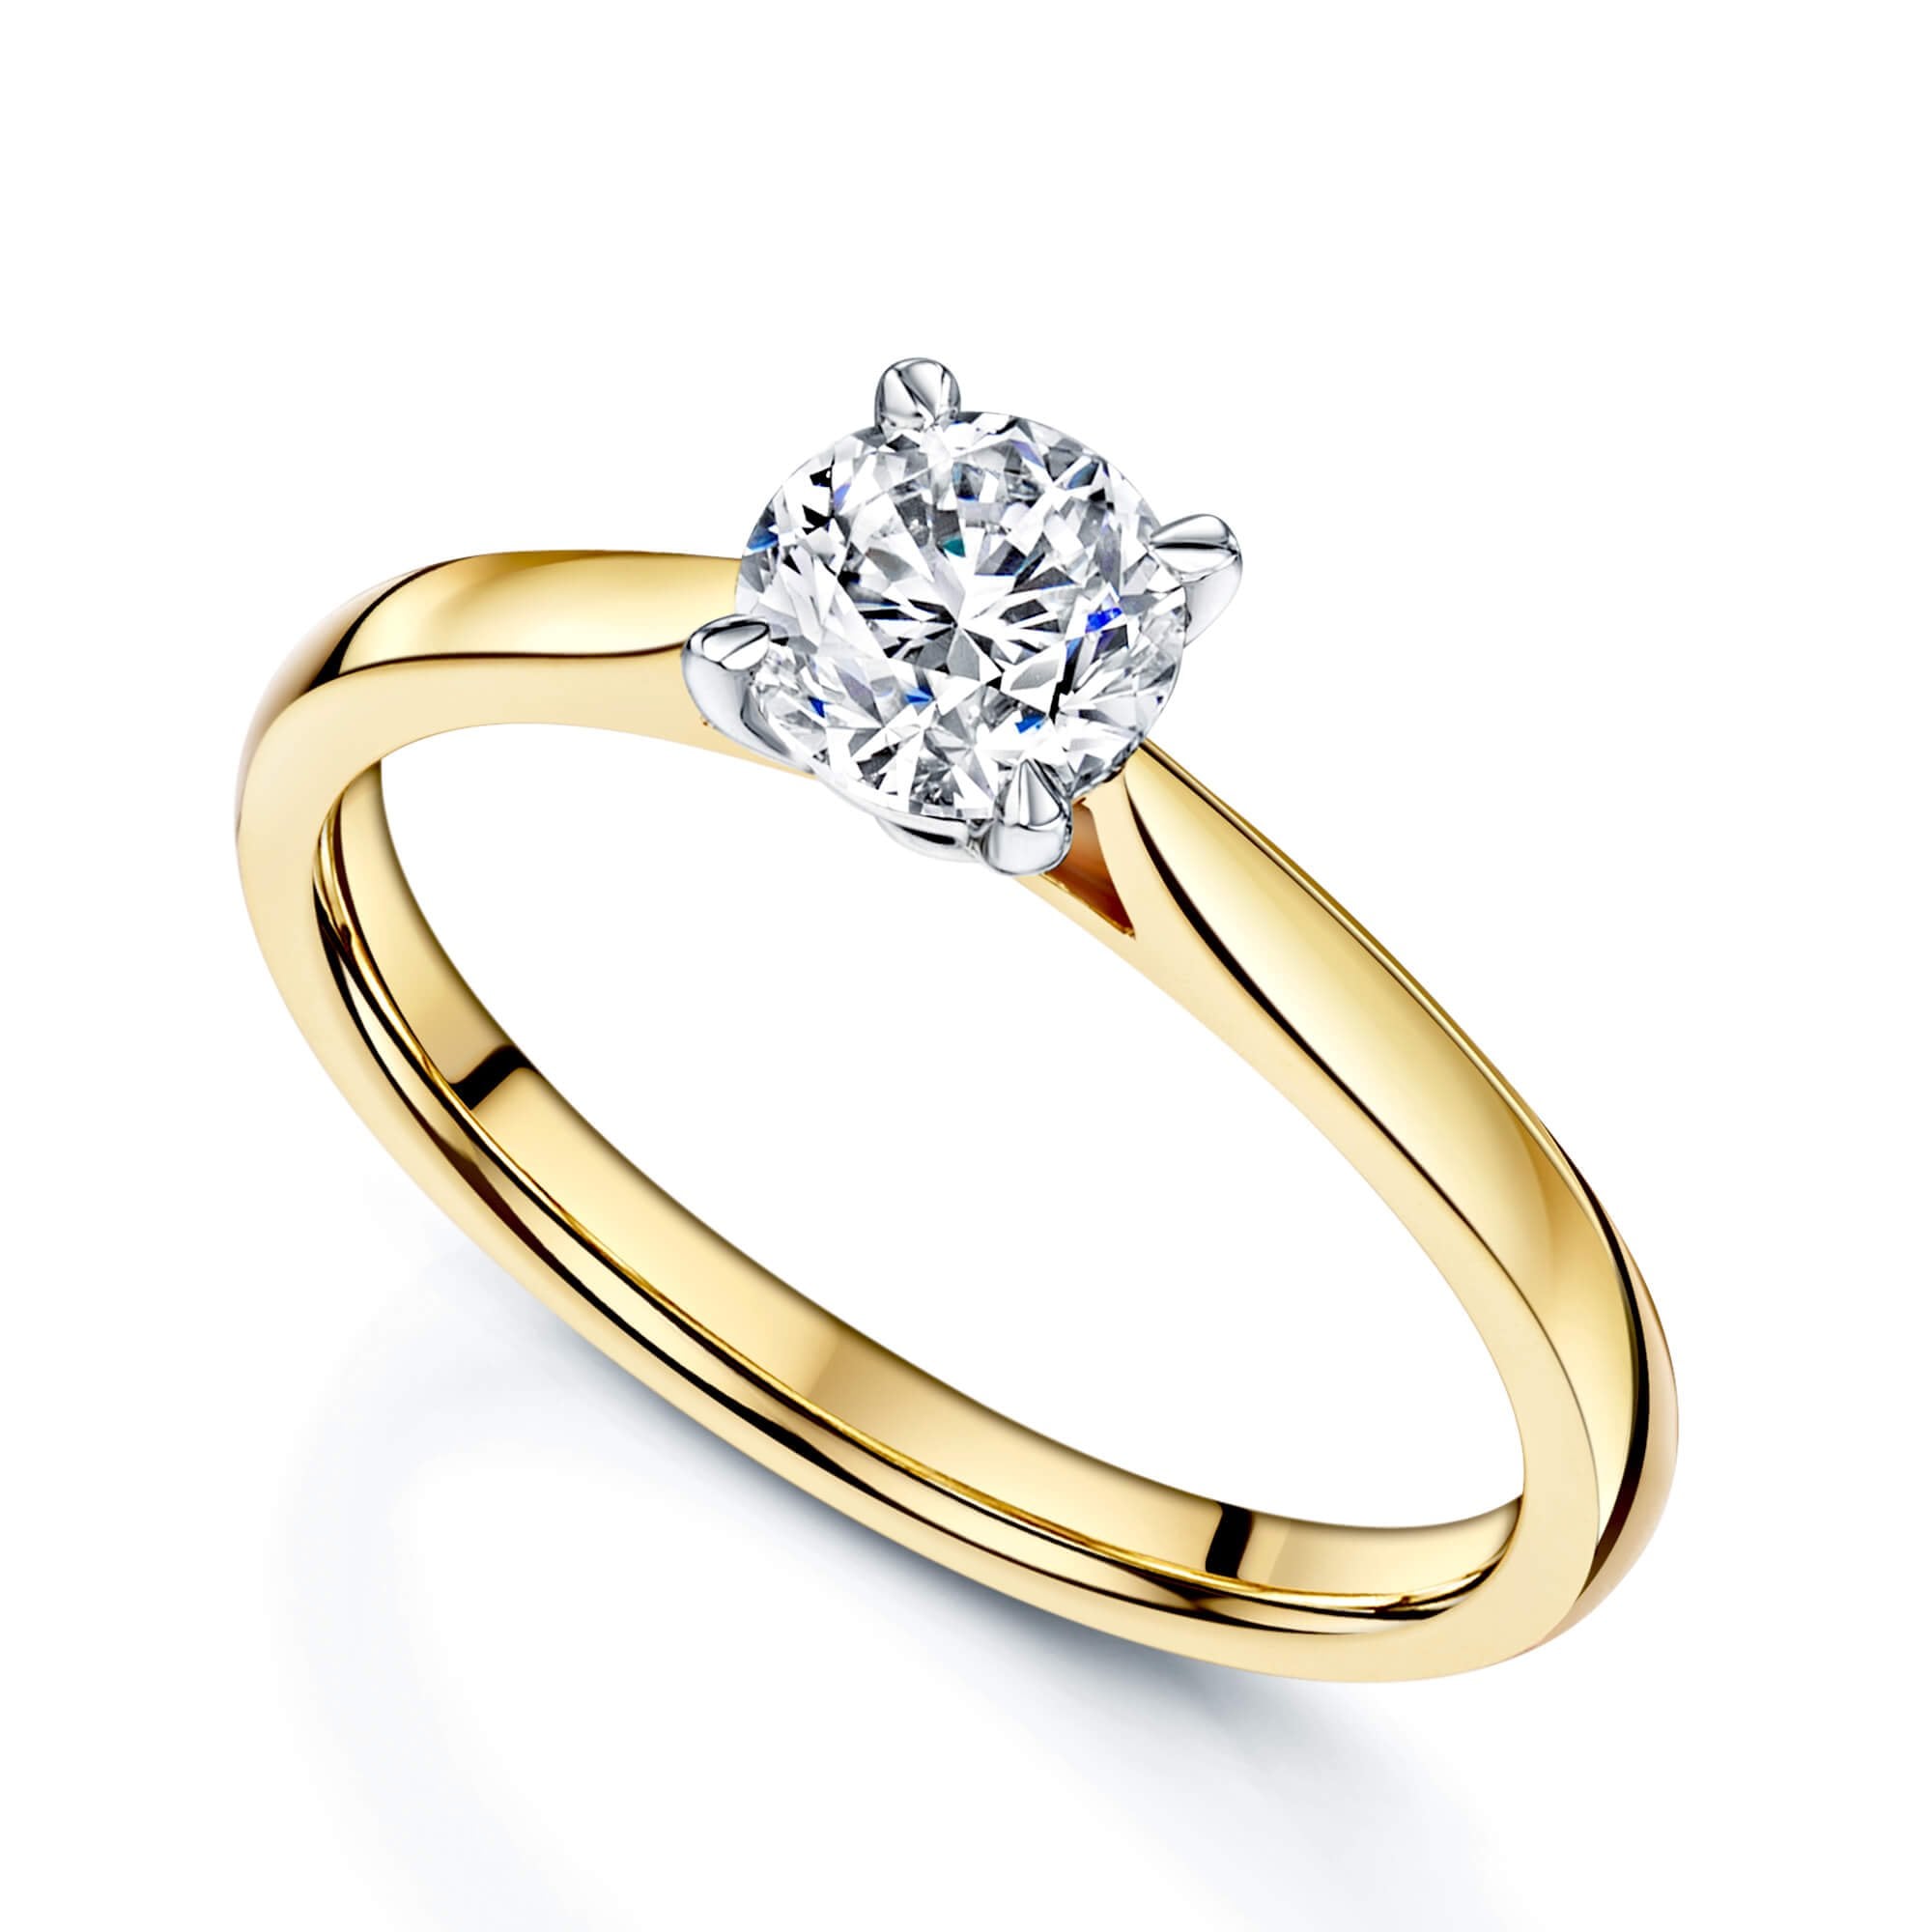 Simply Solitaire Collection 18ct Yellow Gold Diamond Solitaire Engagement Ring GIA Certified 0.50 Carat